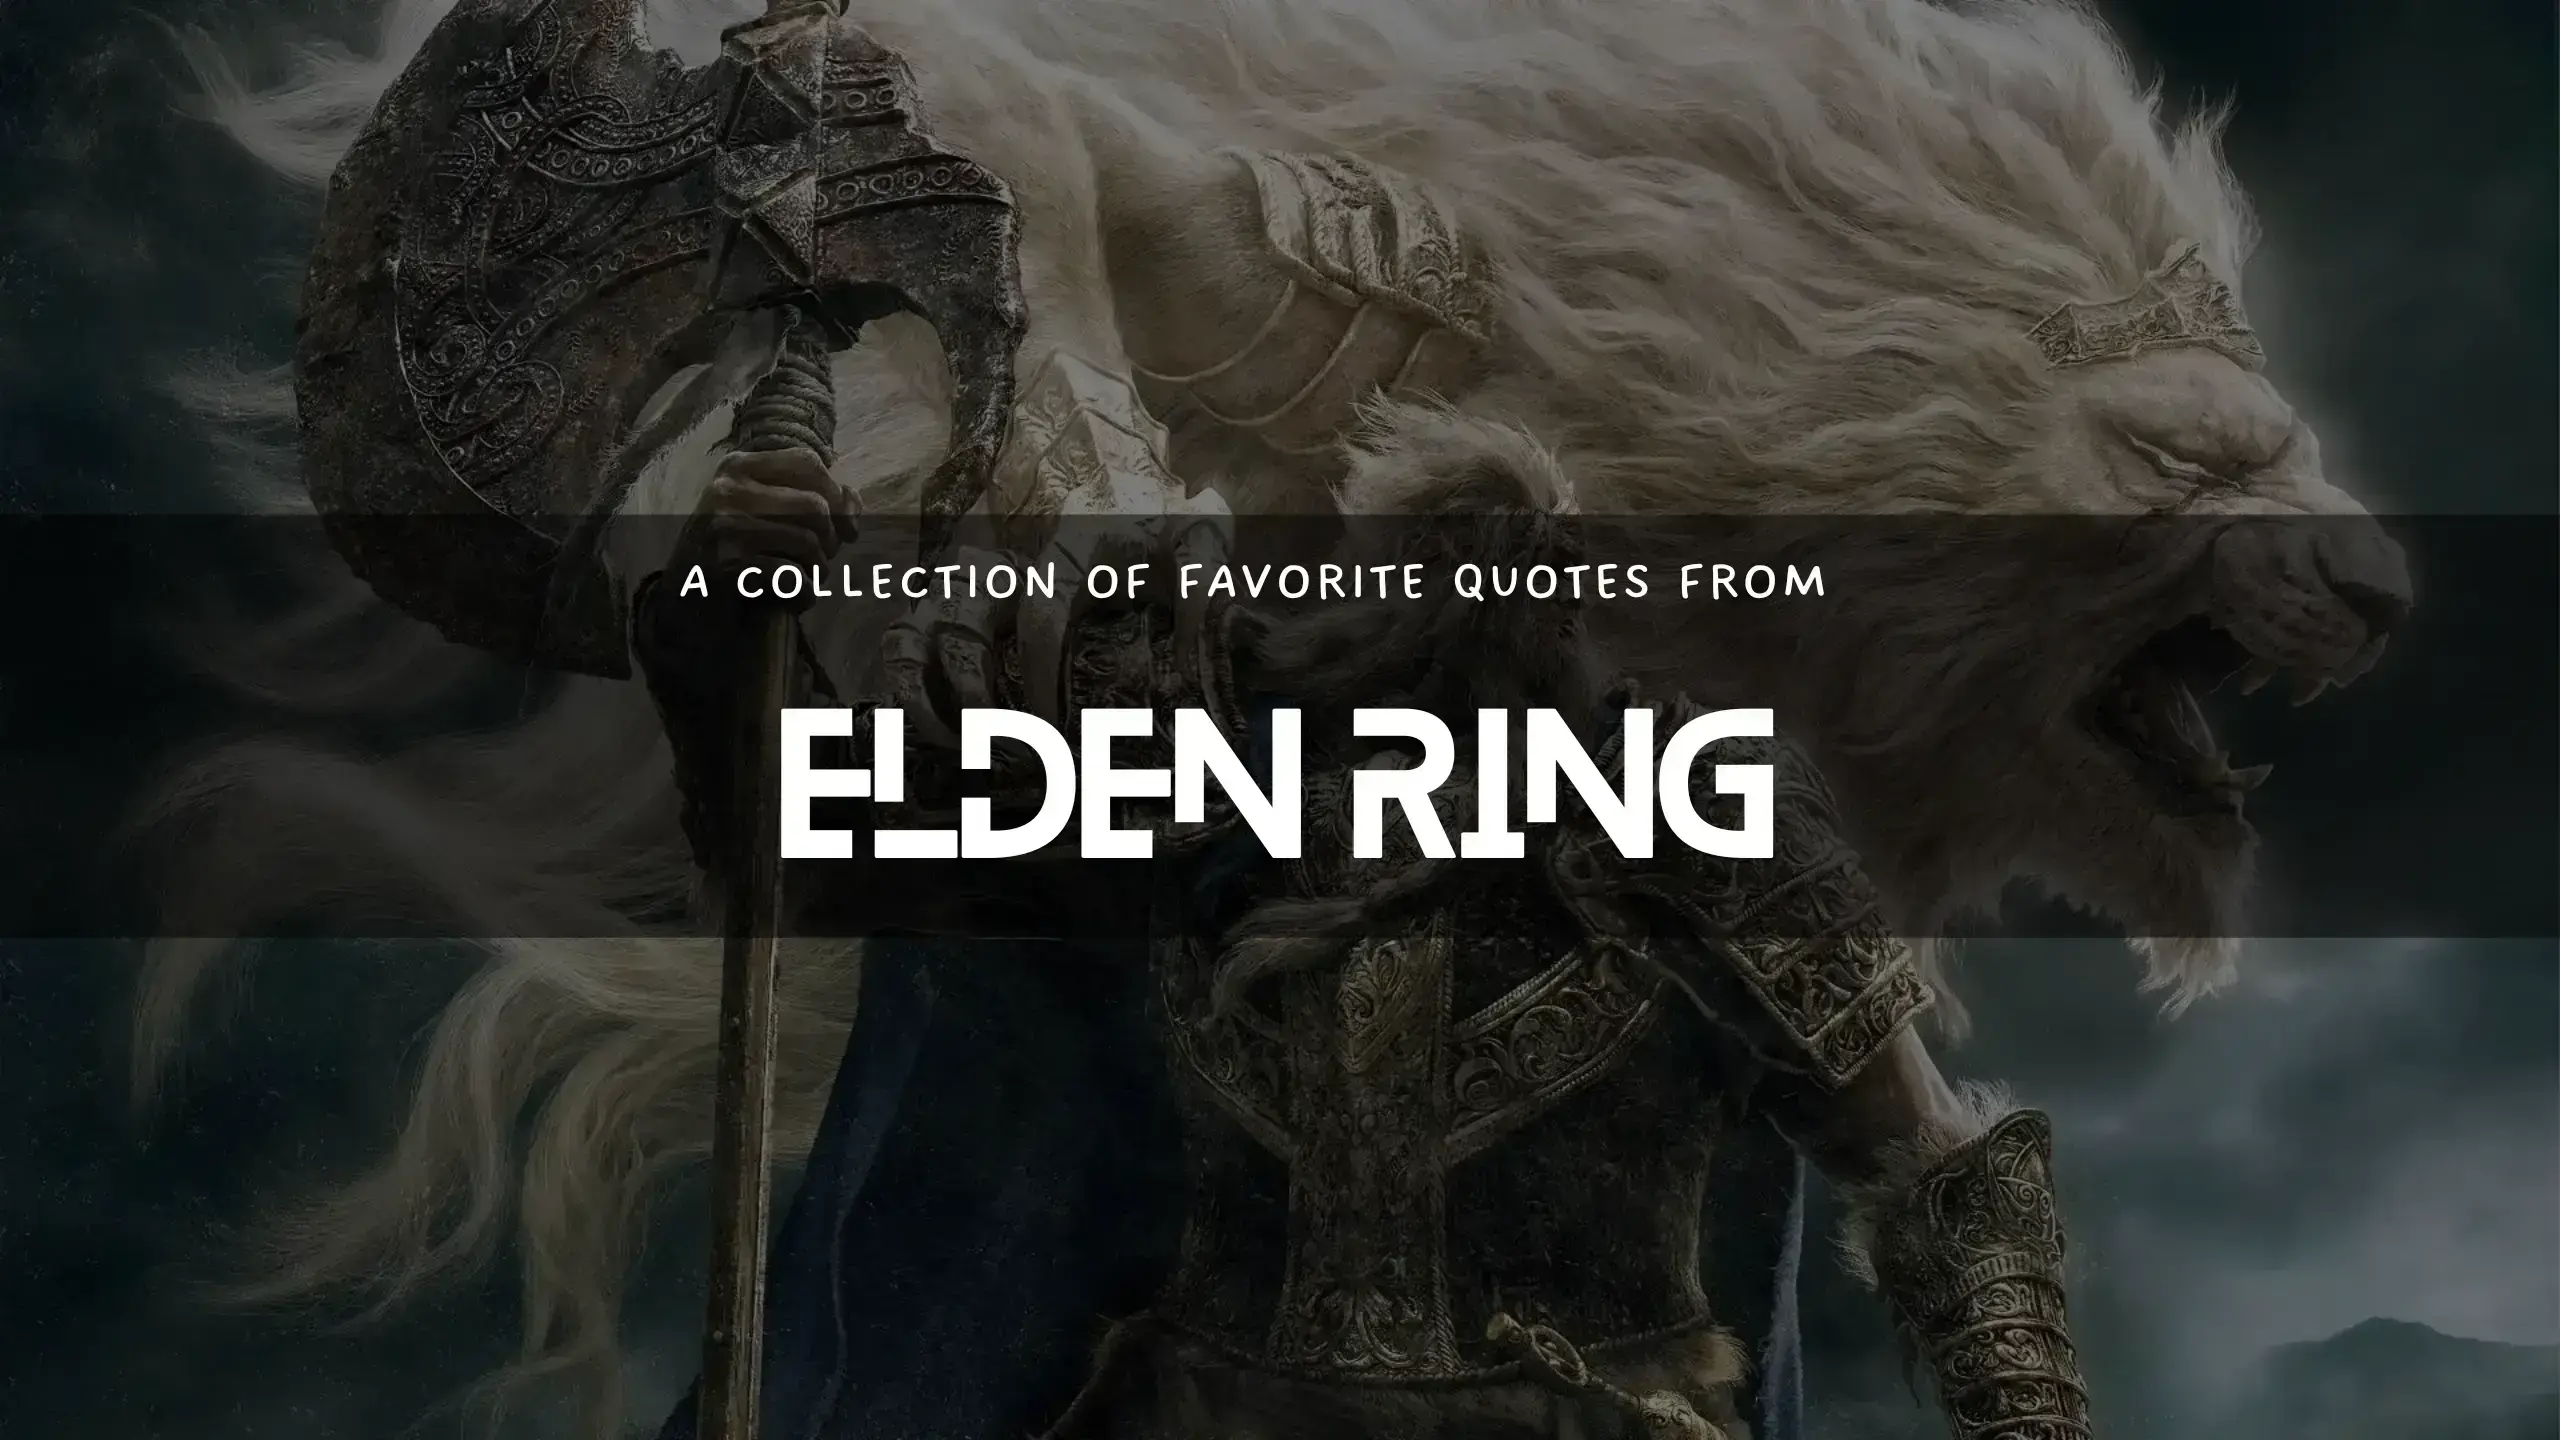 Awesome quotes from Elden Ring